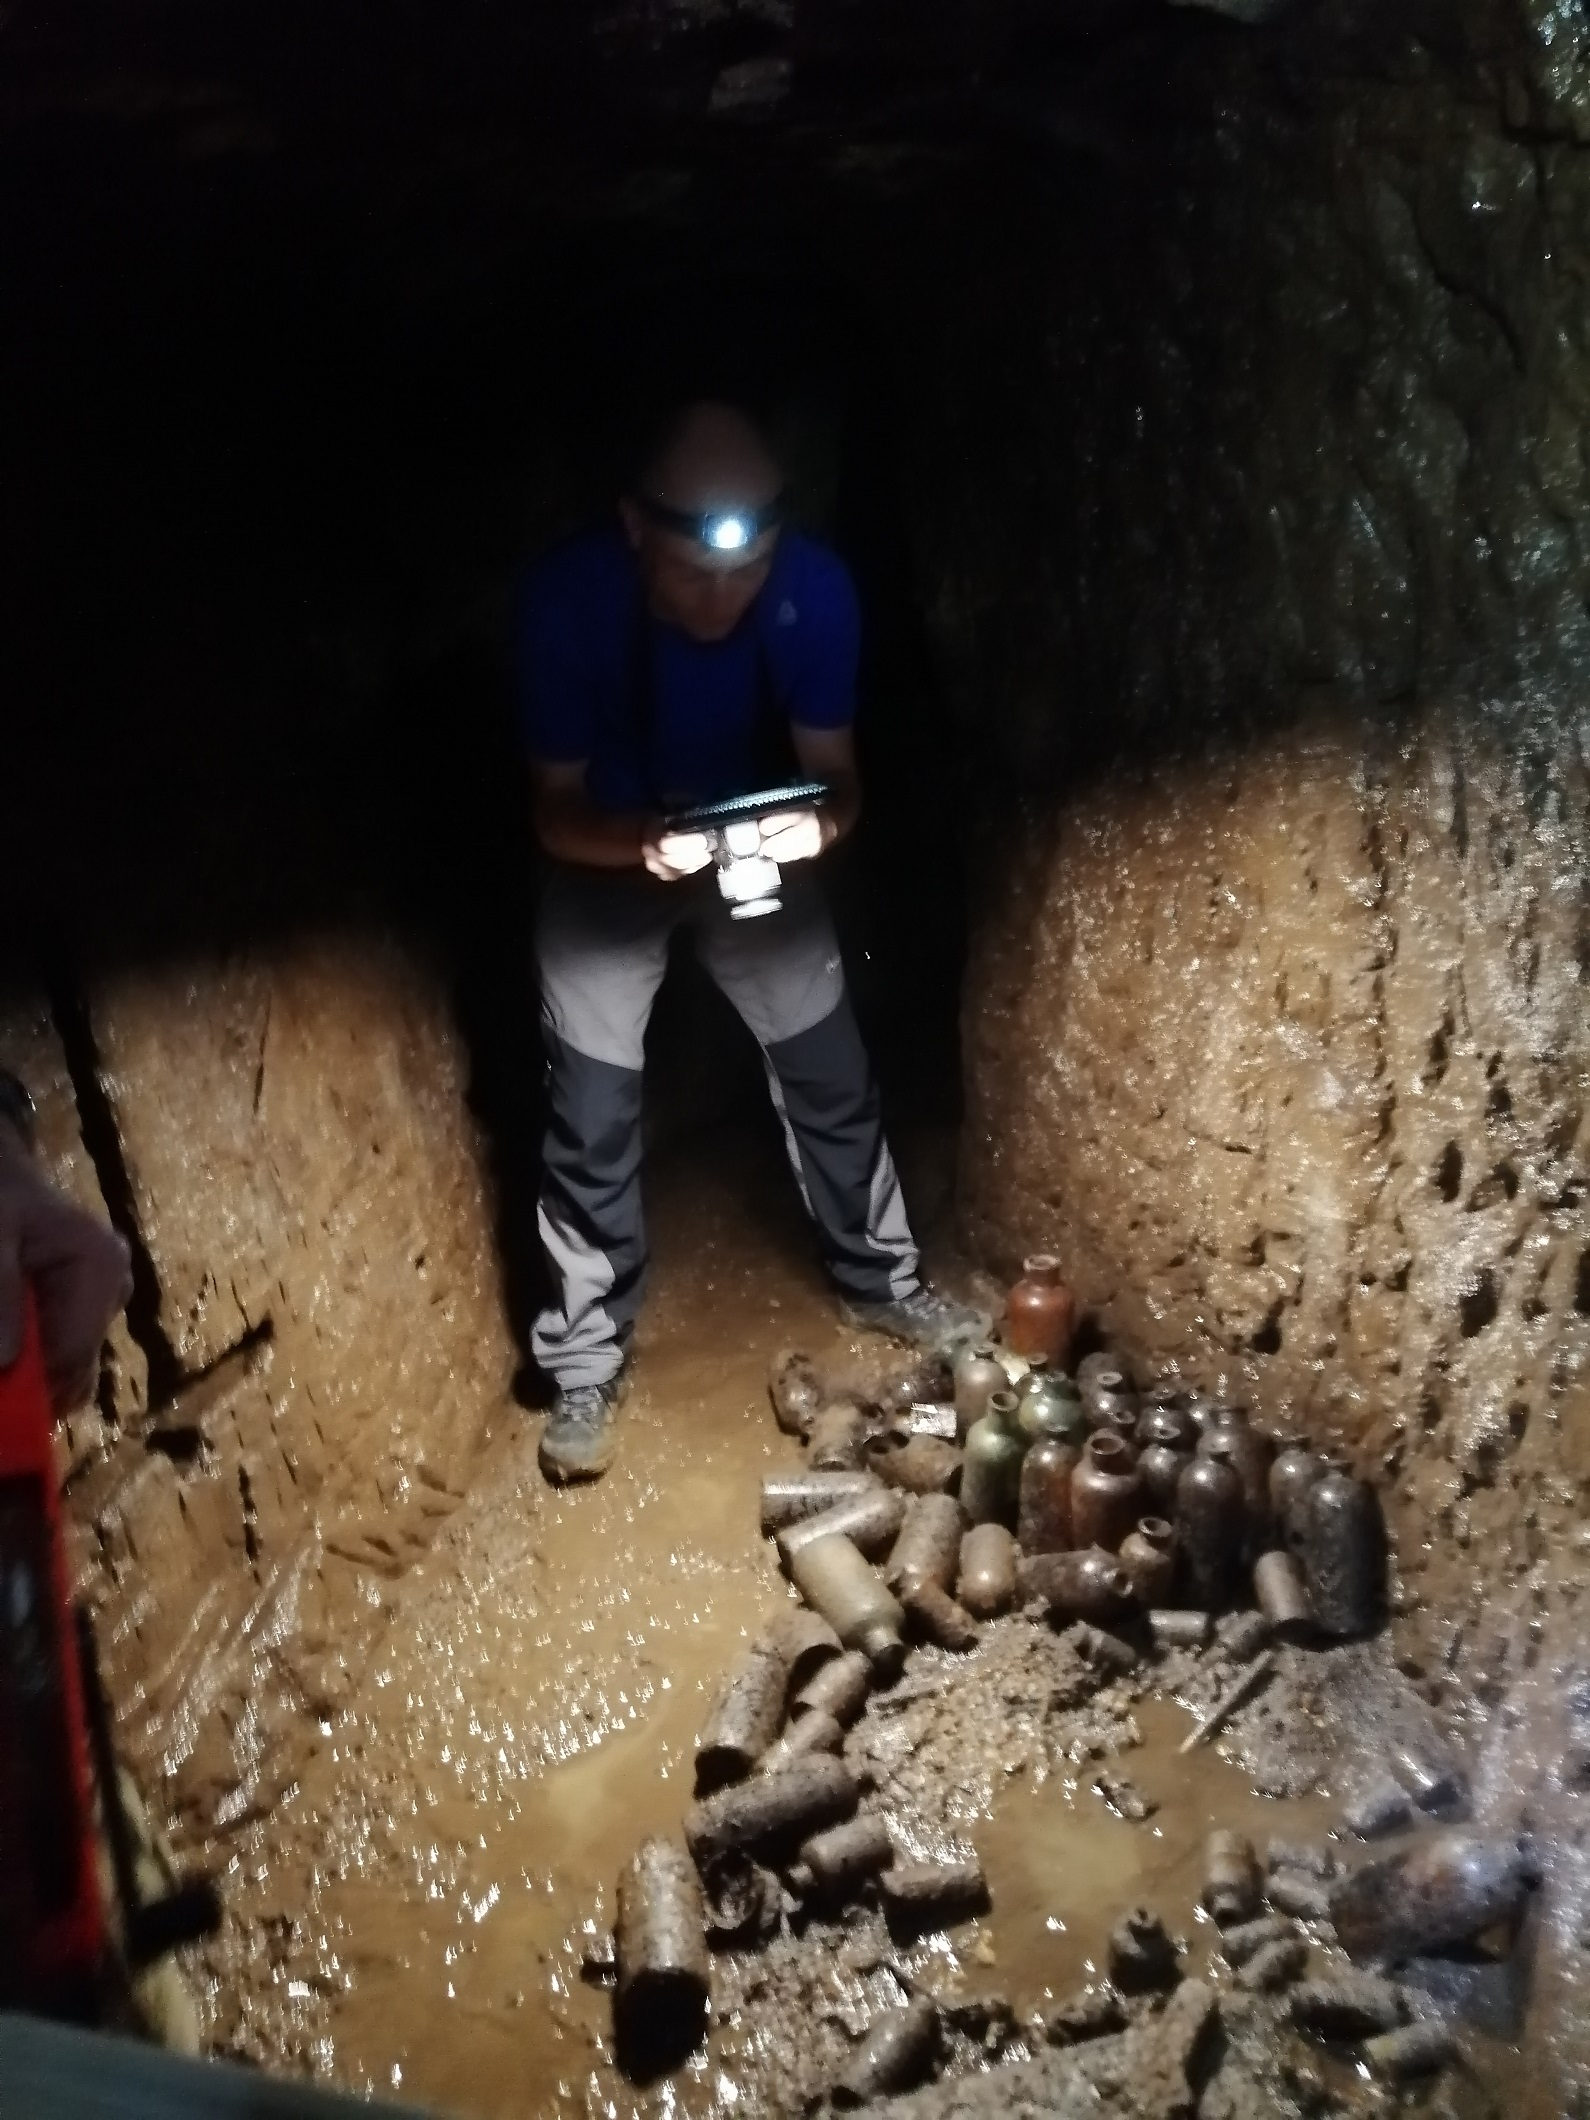 Photographing artefacts in the tunnels of Kolombangara